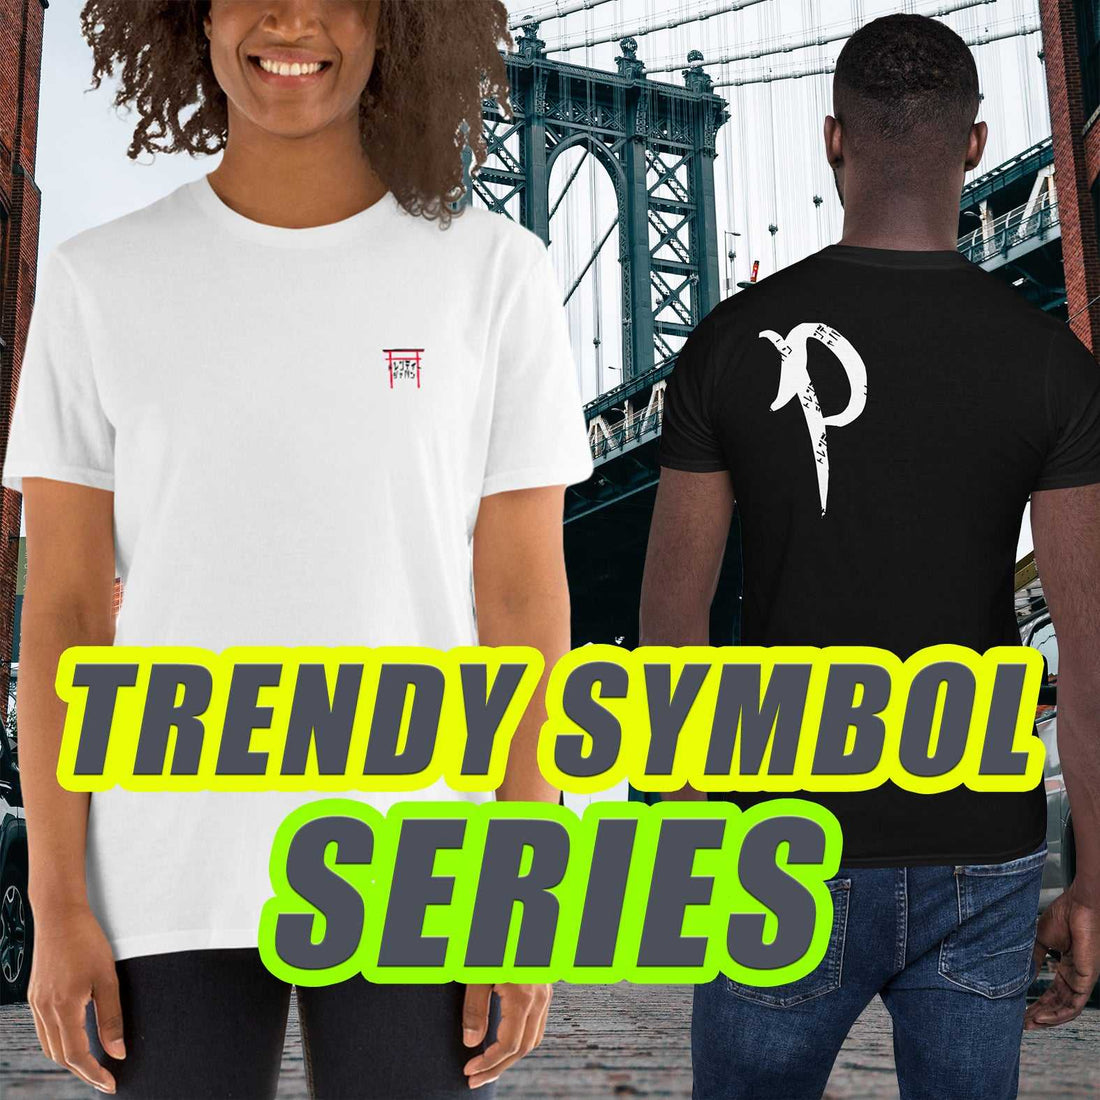 Products redesigned by August 25th | Online Clothing Shop